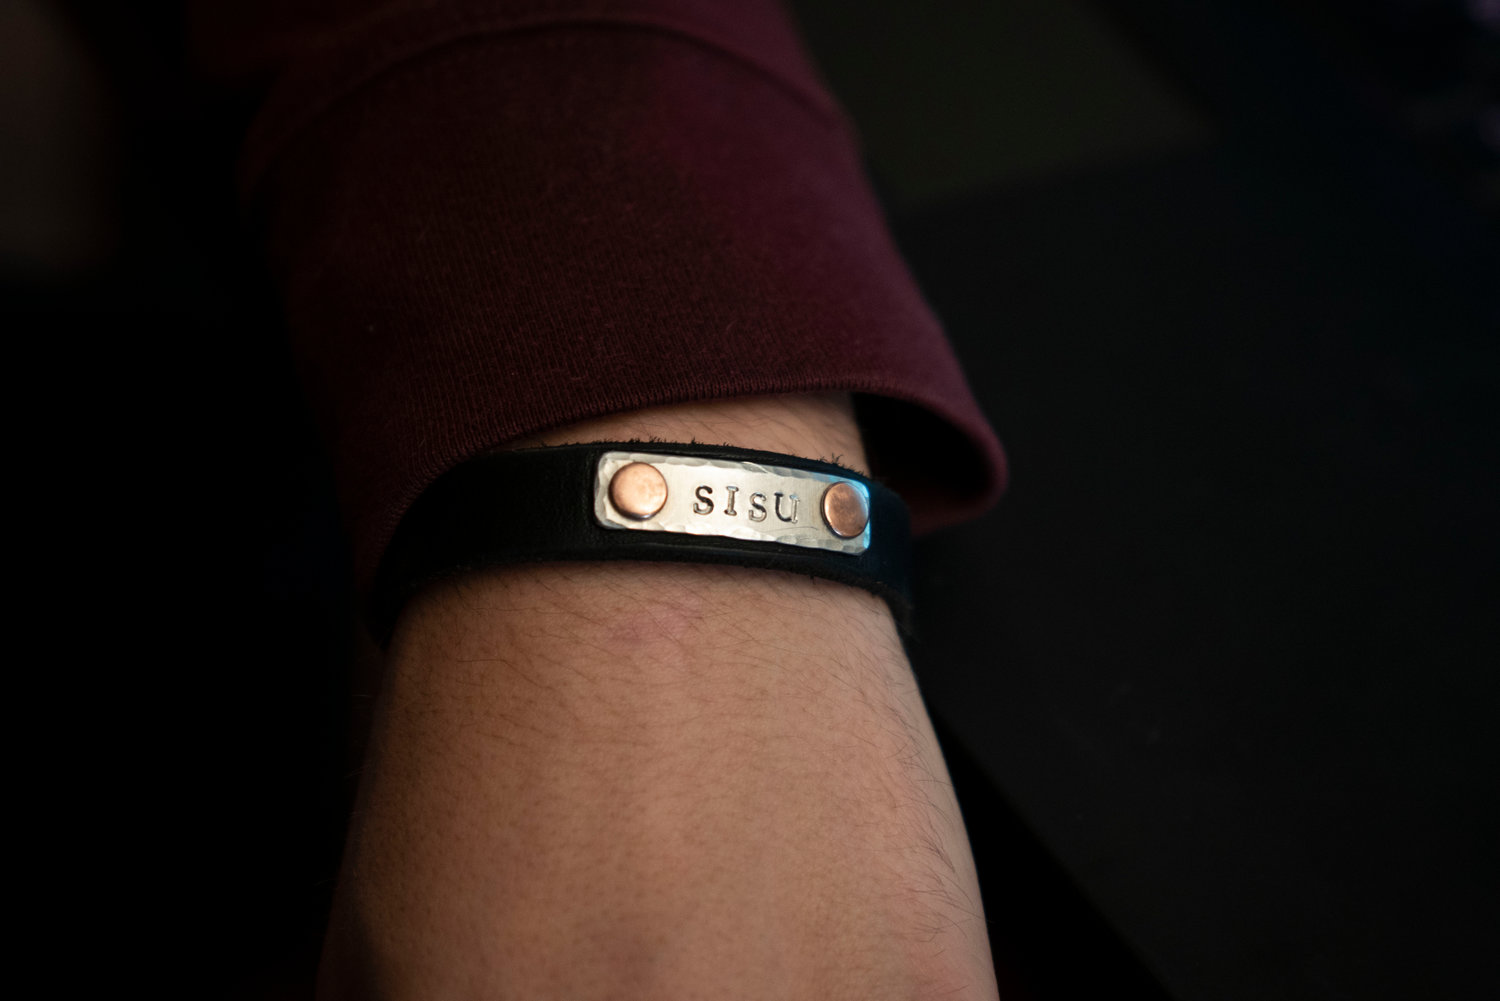 Sam Fisher wears a bracelet engraved with the word “sisu,” the Finnish concept of maintaining a resilient and tenacious character. A few years ago, when Sam was brought to the emergency room for an appendicitis scare, his mom was shocked to receive a $1,400 bill, despite their private health insurance.